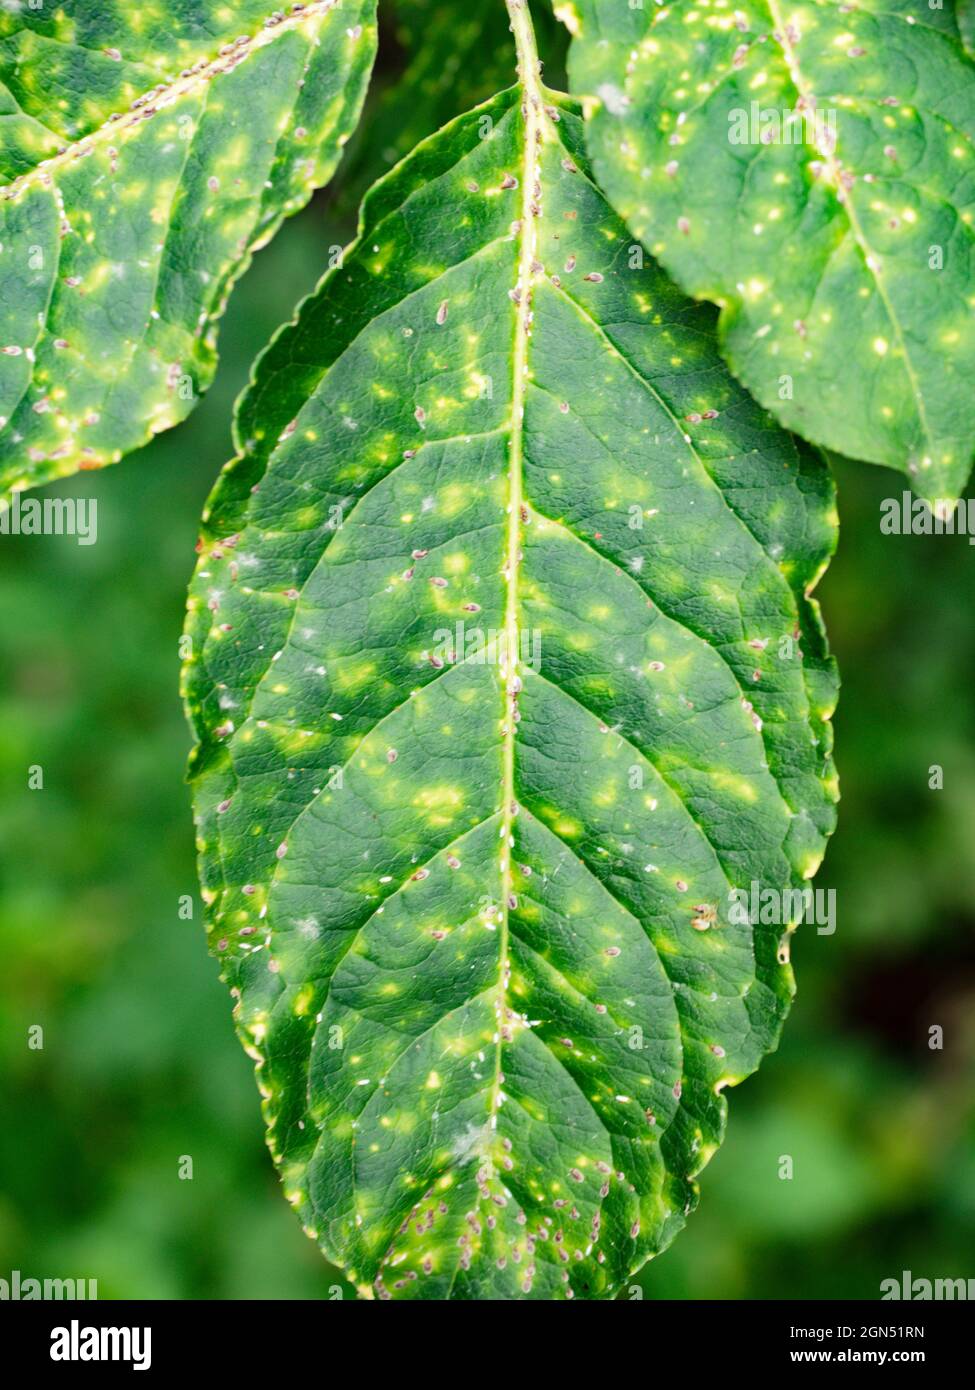 White aphid or greenfly diseases on leaves of European spindl, Euonymus europaea. Yellow white dots on damaged leaves and drying of the bush. Stock Photo